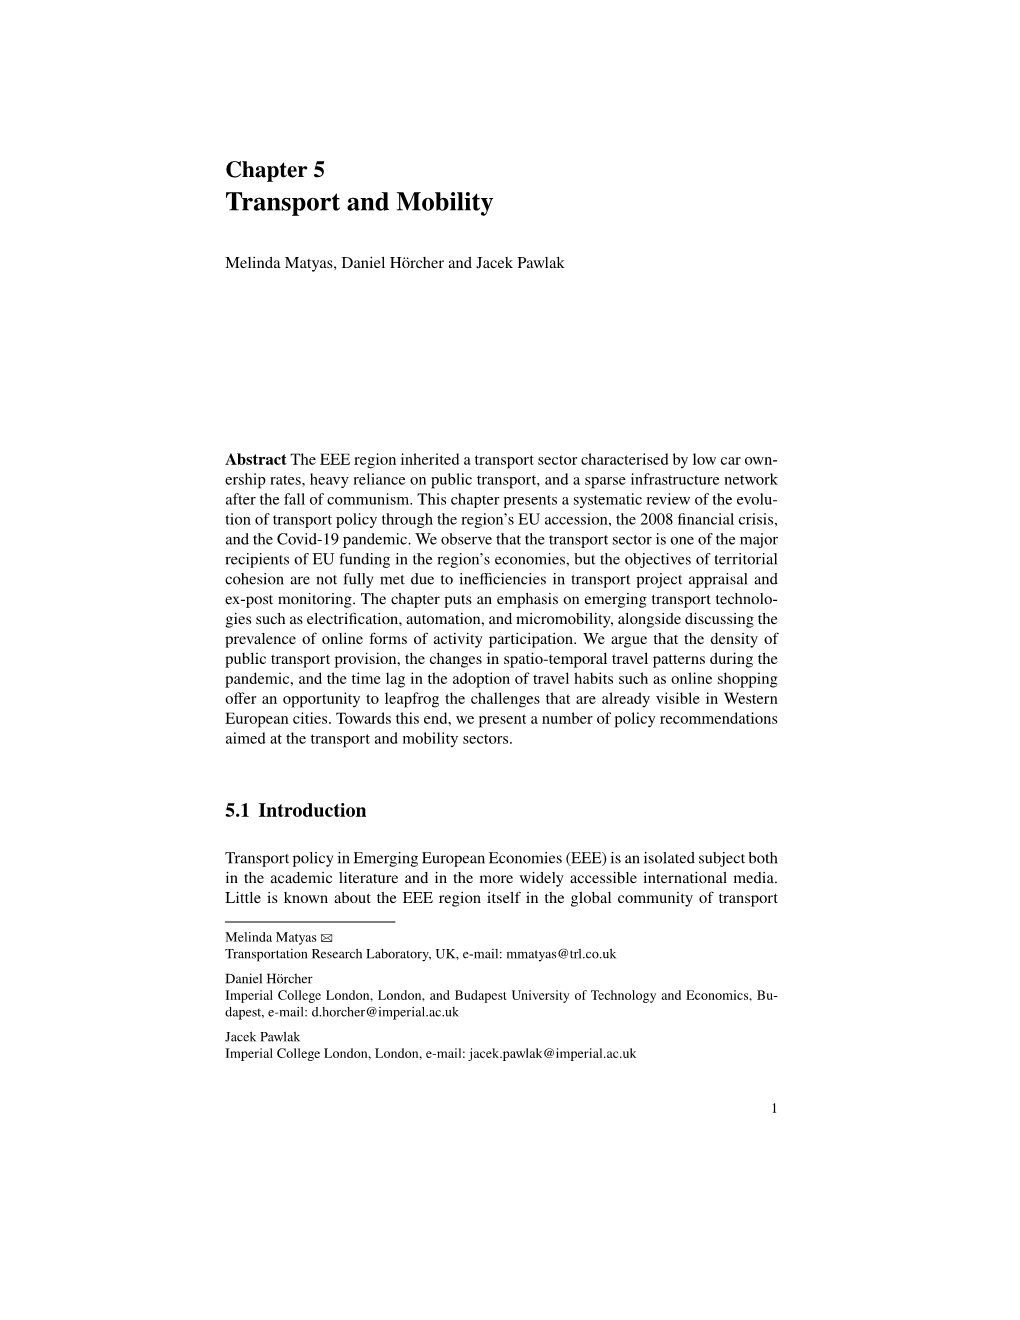 Transport and Mobility